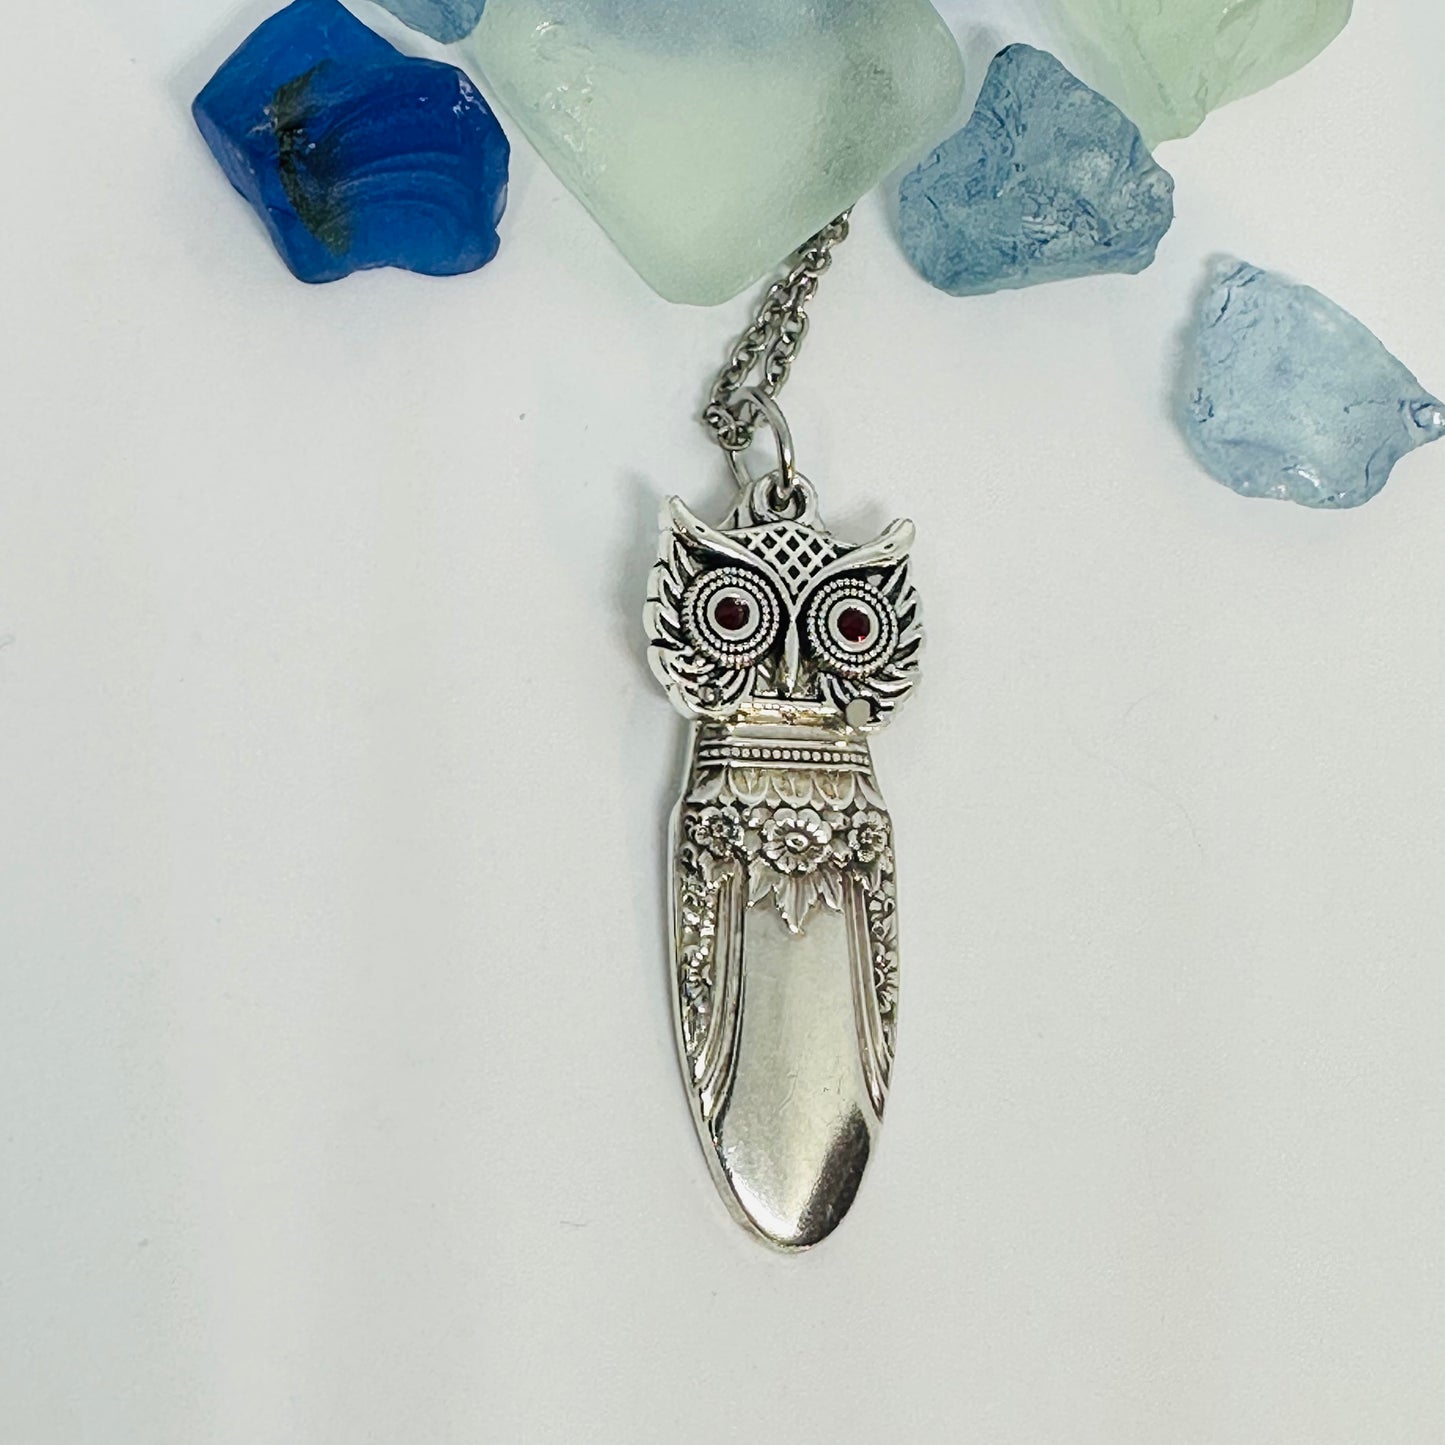 Owl with Birthstone Eyes “First Love” 1937 Vintage Silverware Necklace | Up-Cycled Jewelry | Birthday Pendant | Antique | 1.8mm Swarovski Eyes